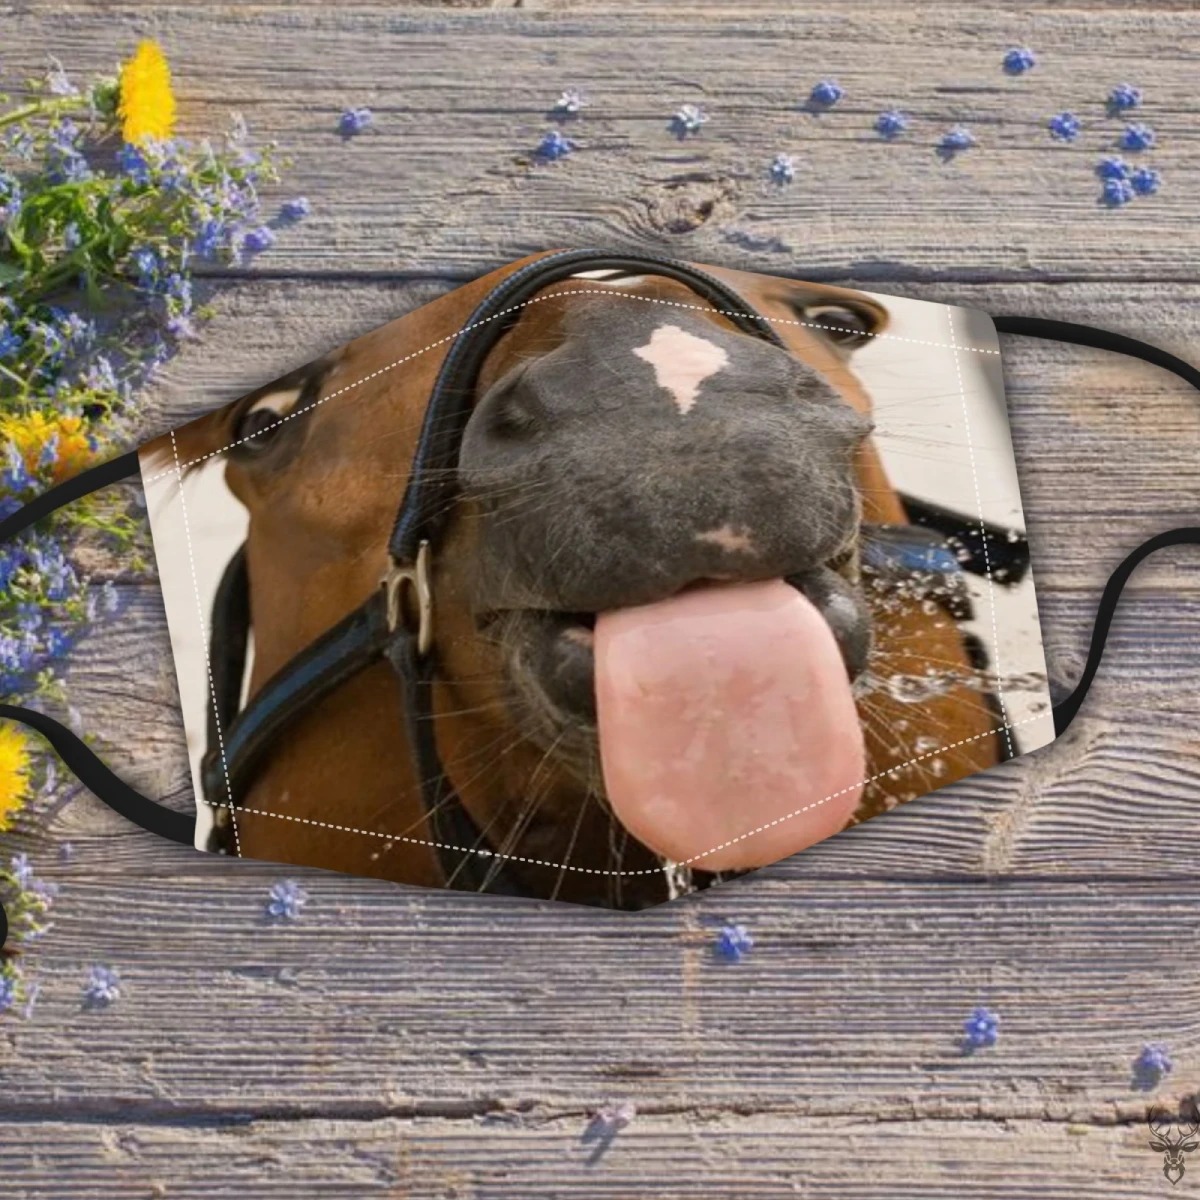 Horse licking out tongue face mask